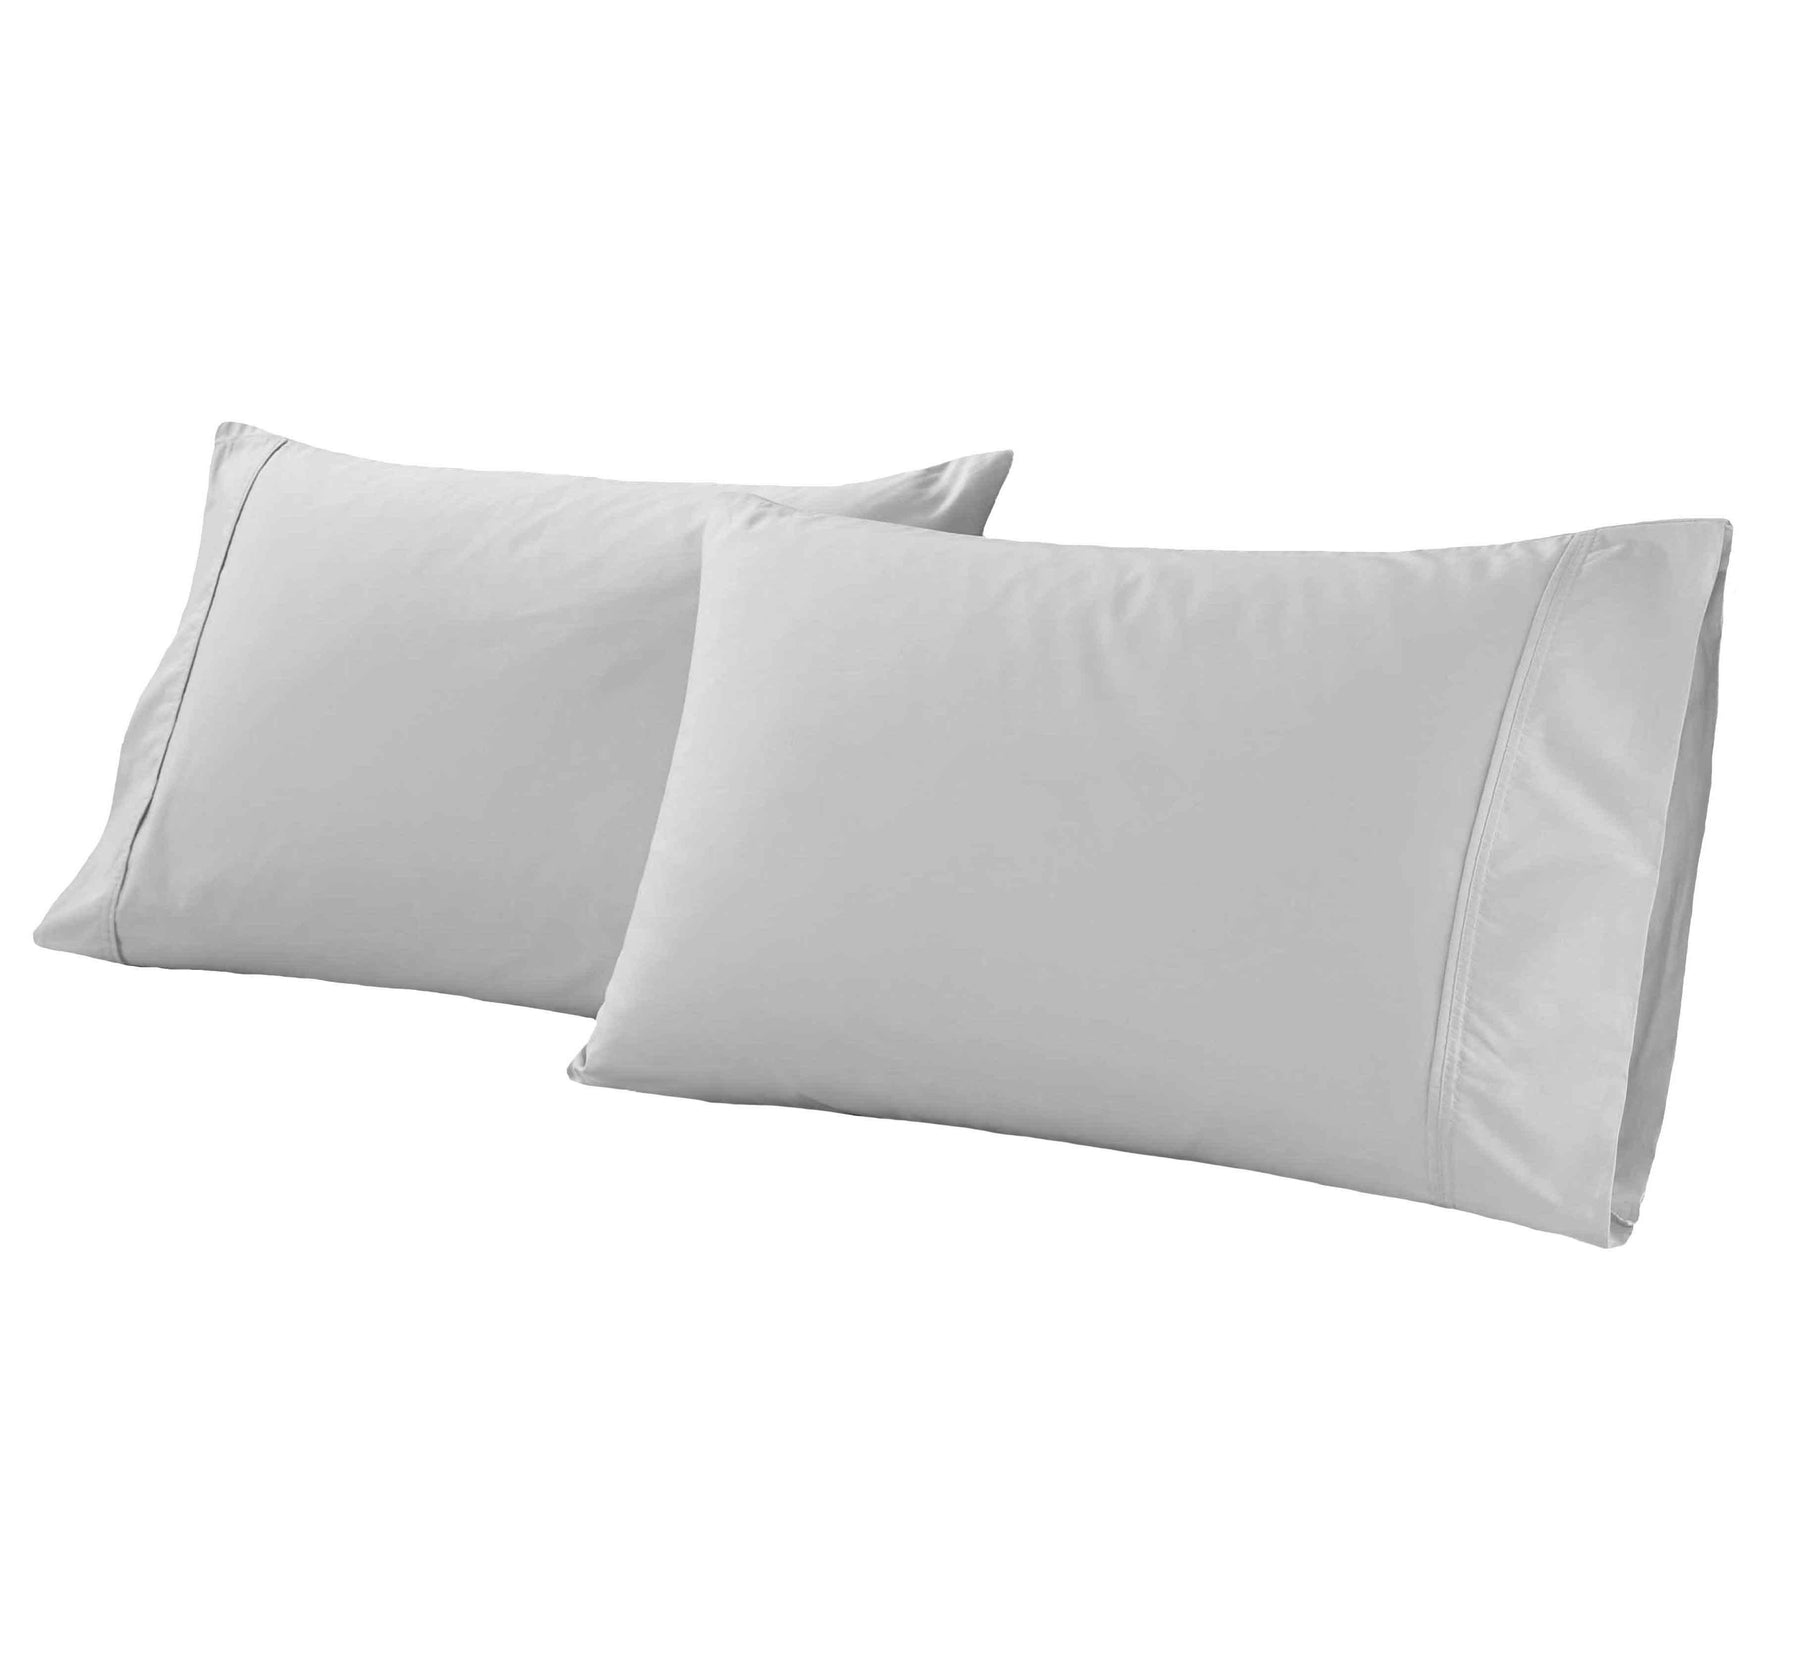 Gina Organic Cotton 300 Thread Count Percale Pillowcases, Set of 2 - Pillowcases by Superior - Superior 